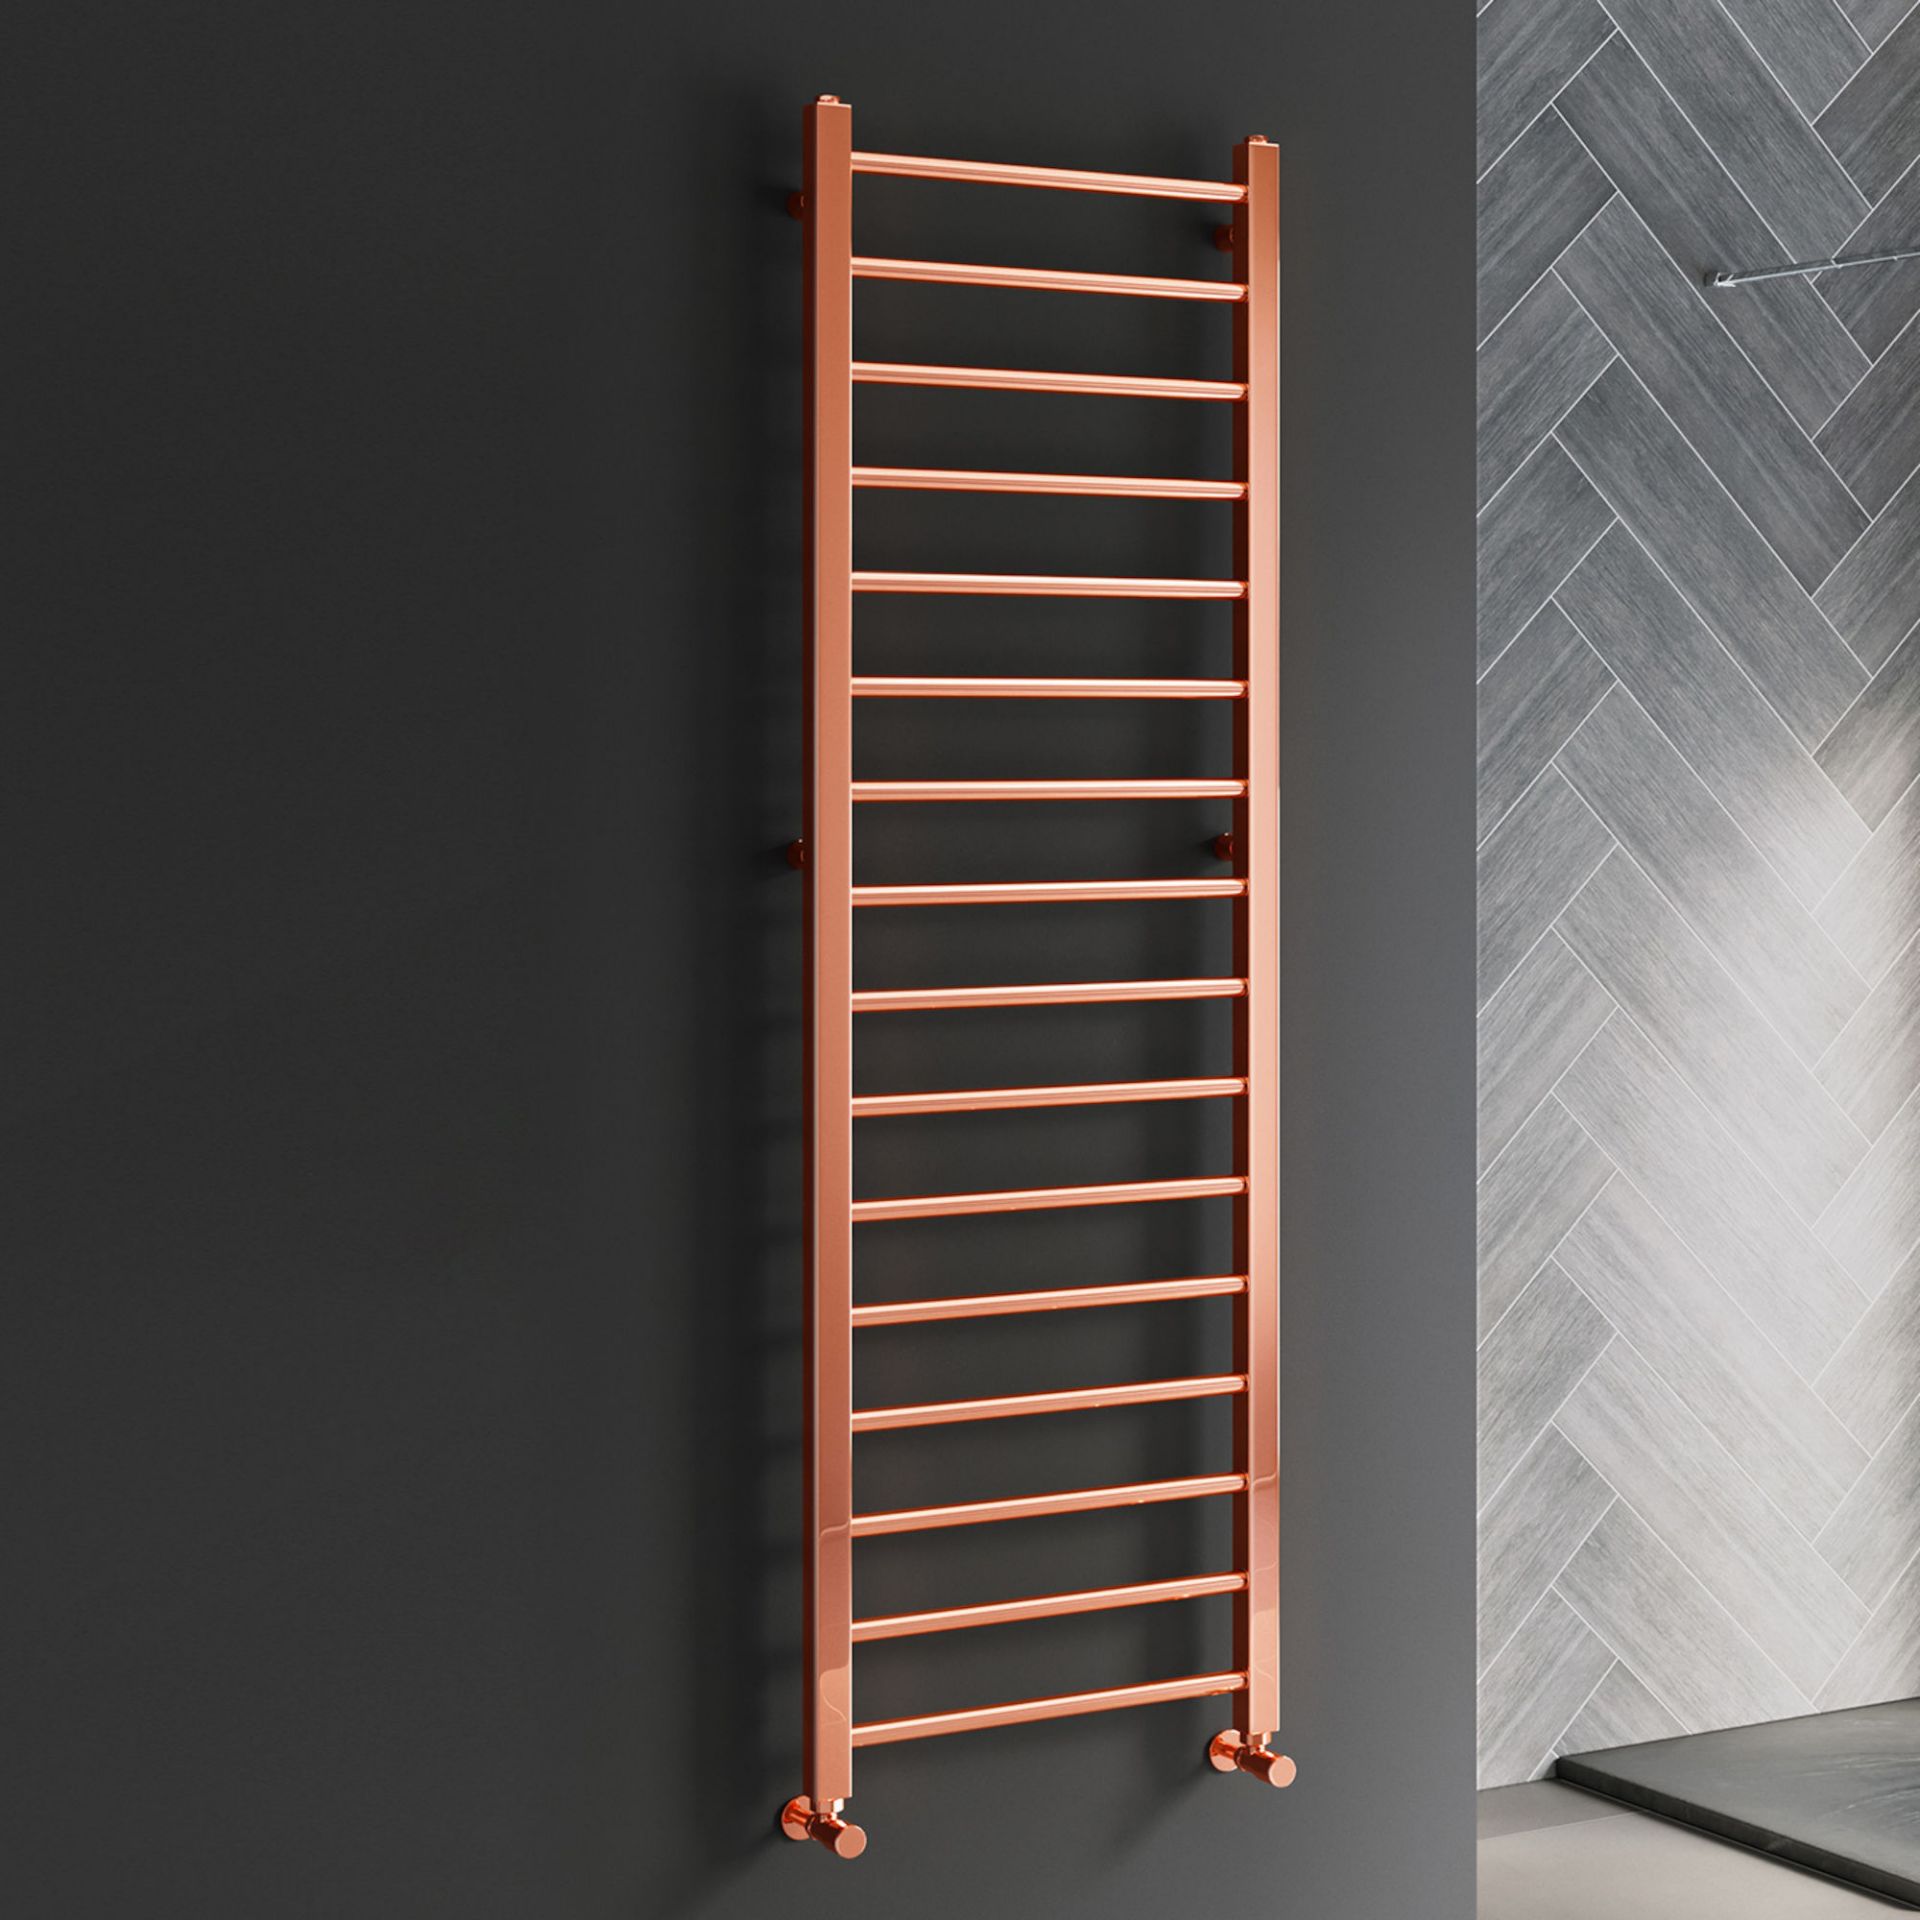 (CS14) 1600x500mm Copper Heated Straight Rail Ladder Towel Radiator. RRP £399.99. Constructed from